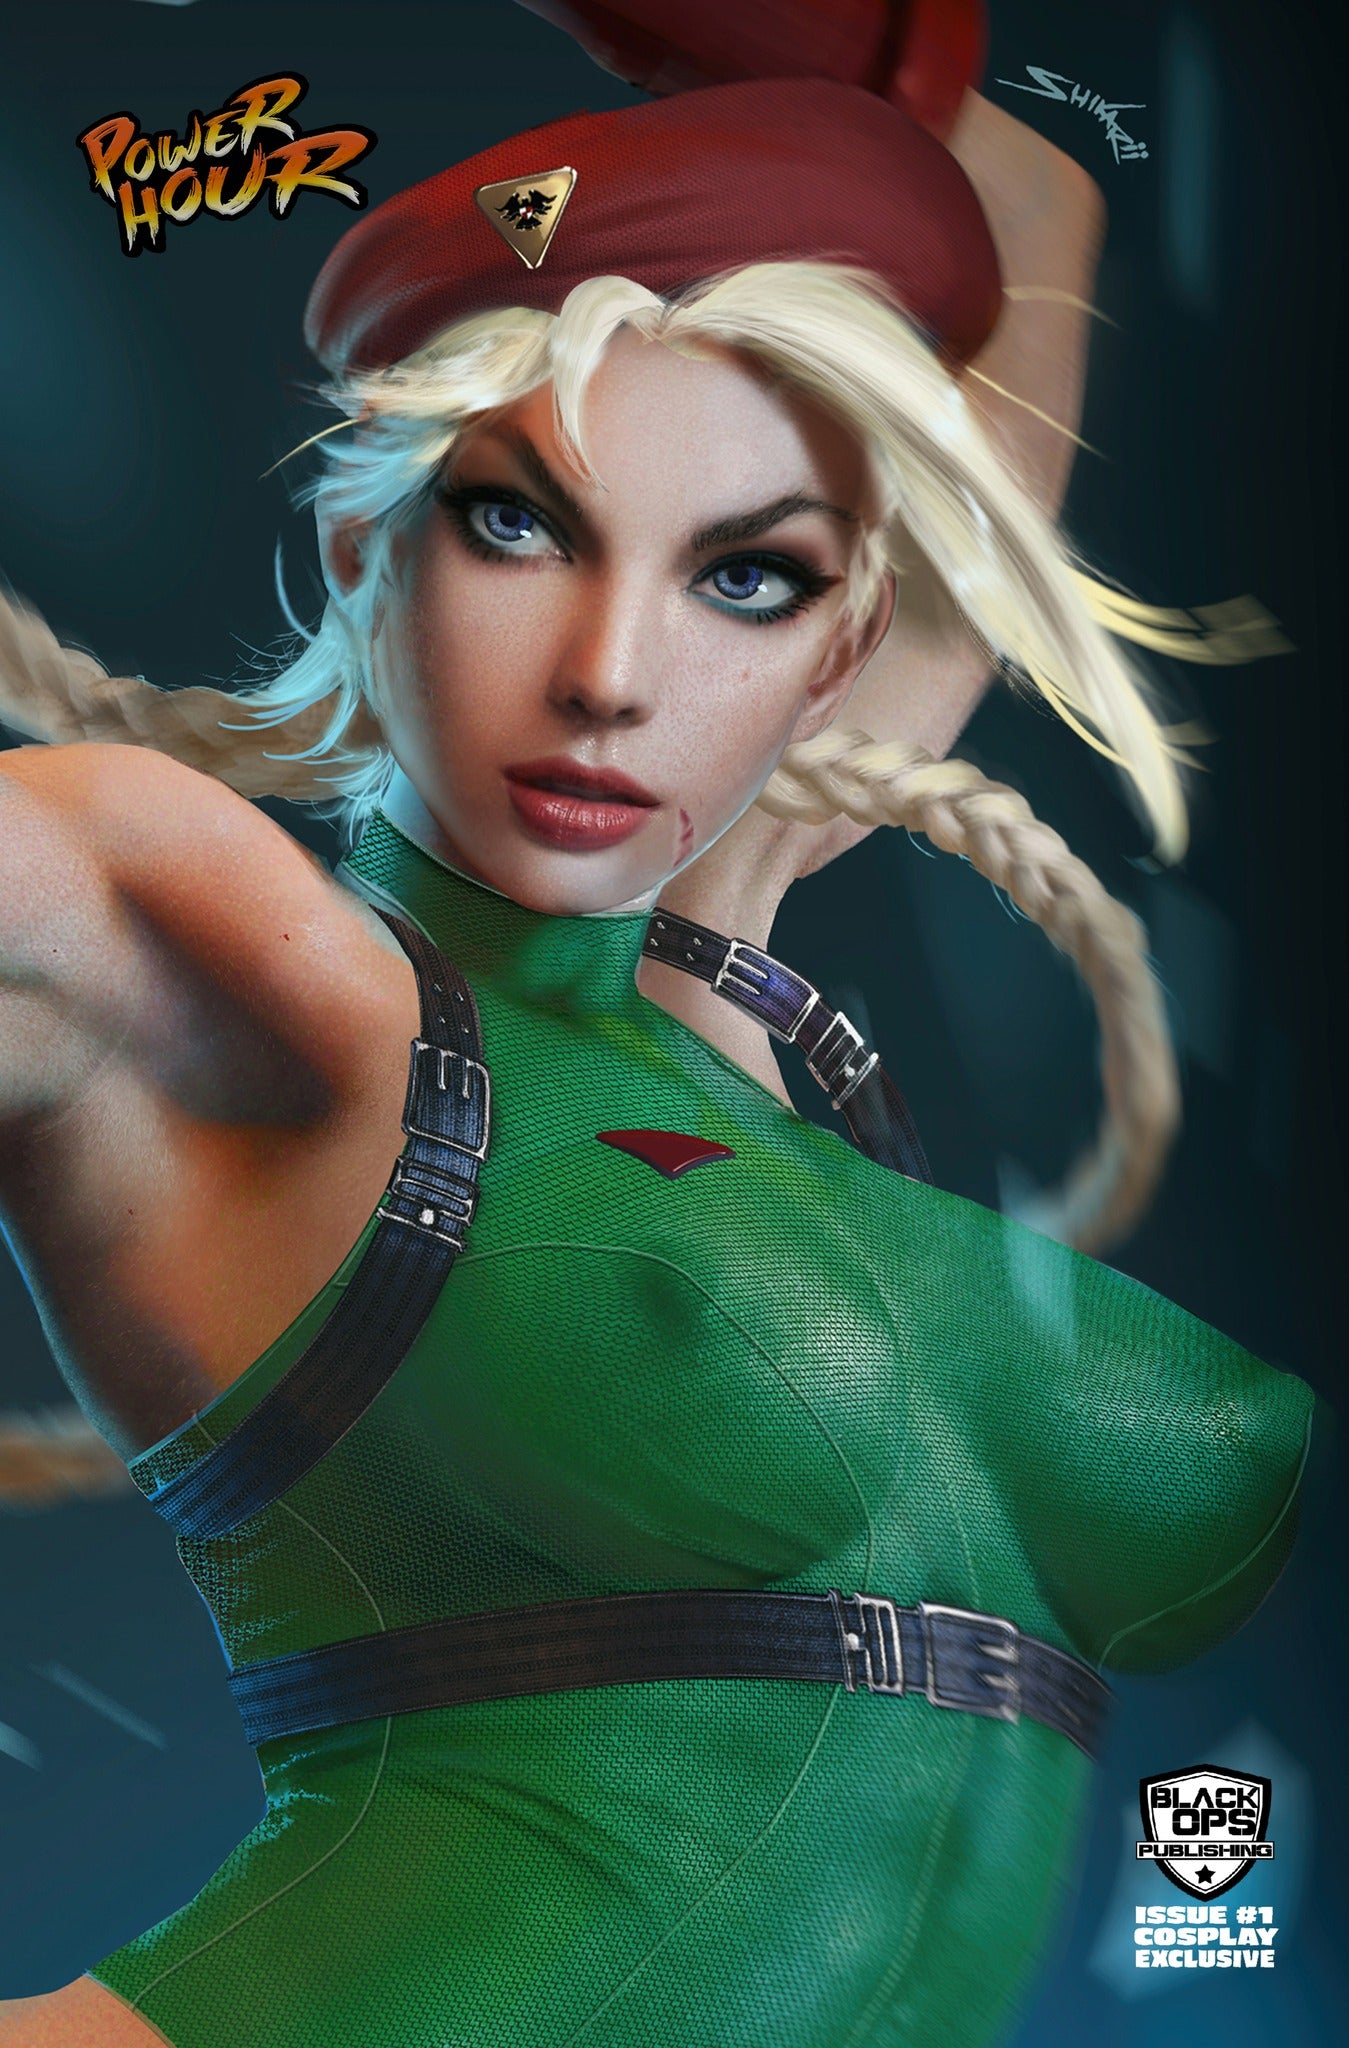 POWER HOUR CAMMY PREVIEW EDITION